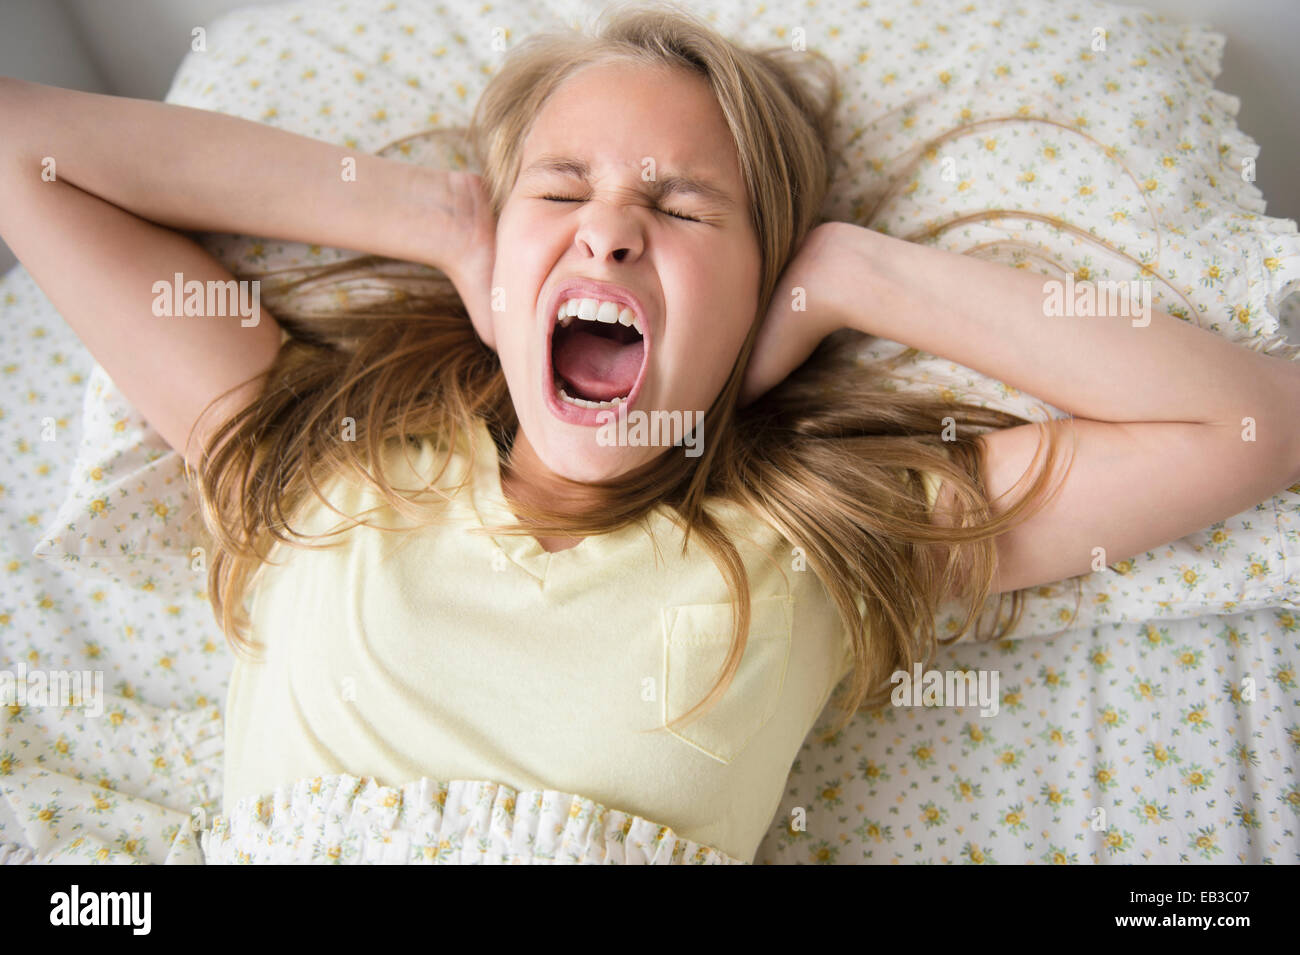 Shouting Caucasian girl covering her ears on bed Stock Photo